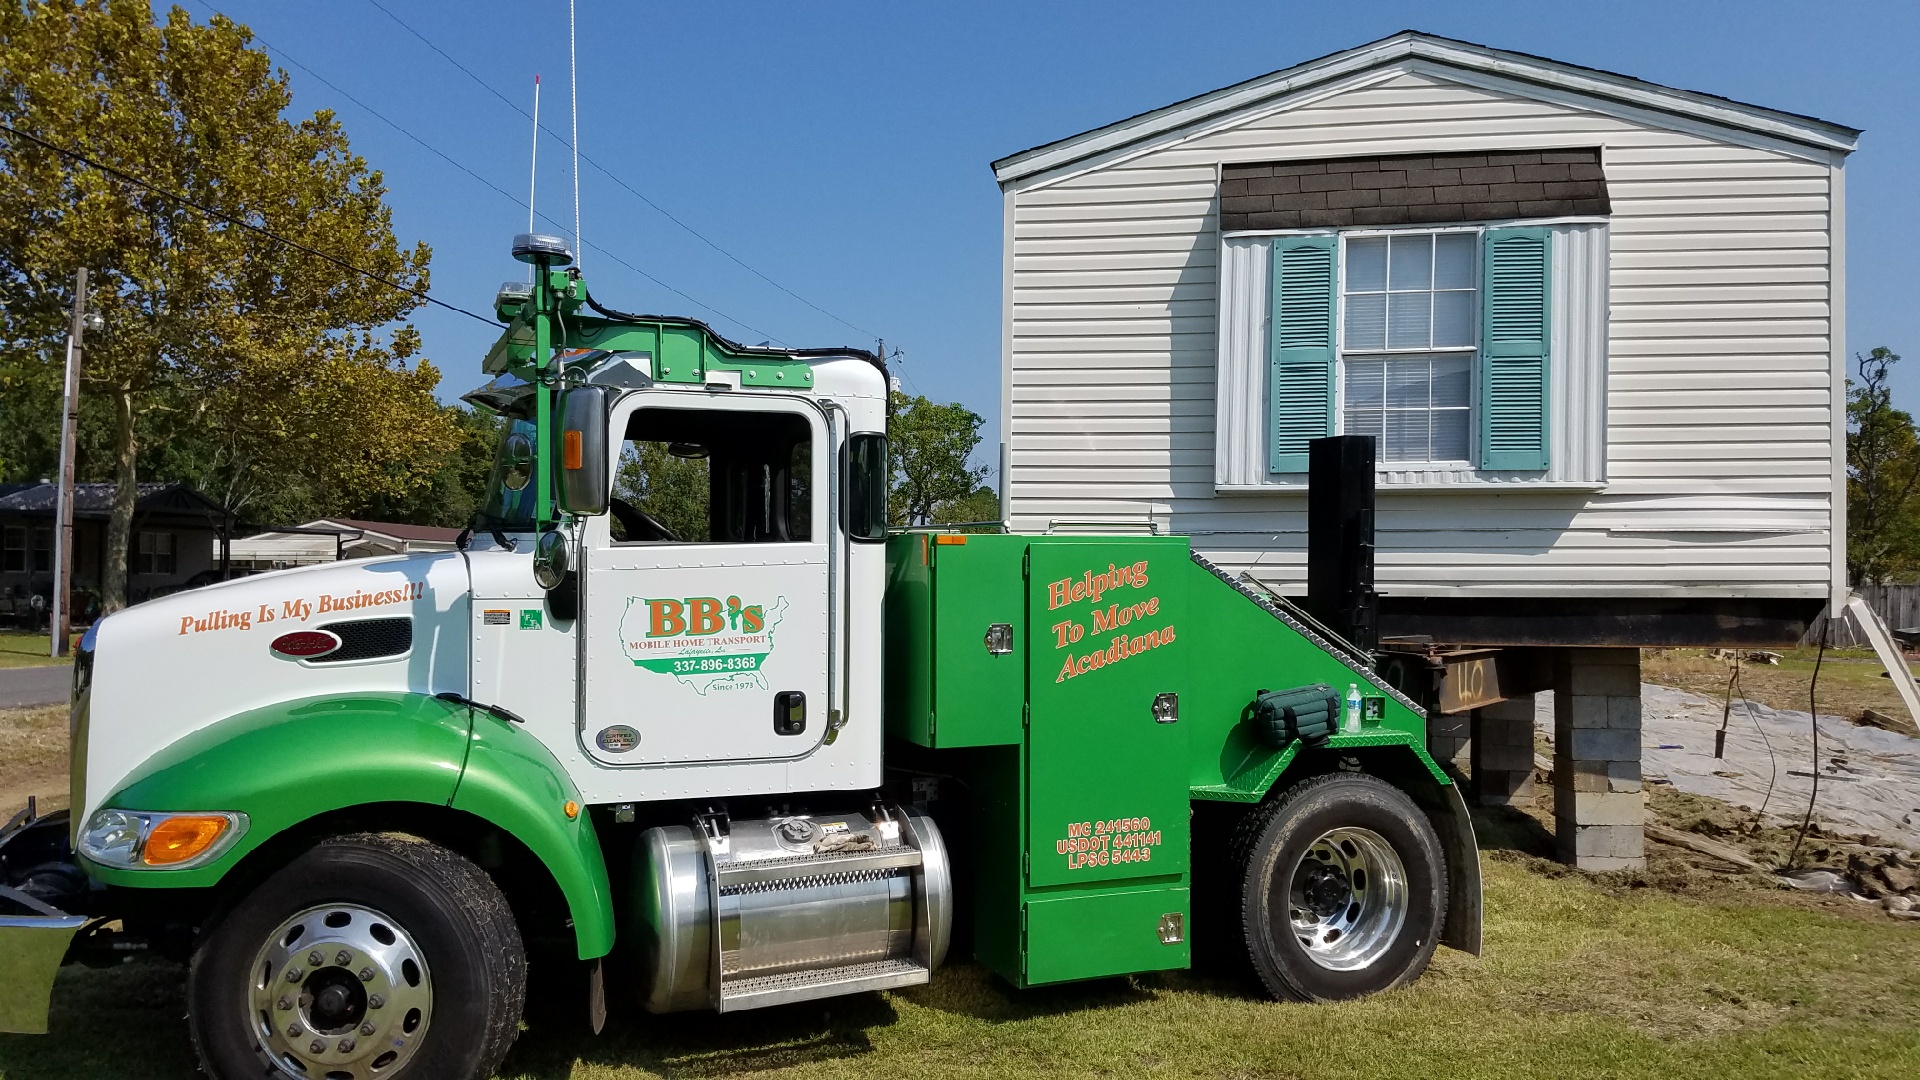 Peterbilt-hooked-to-mobile-home.jpg